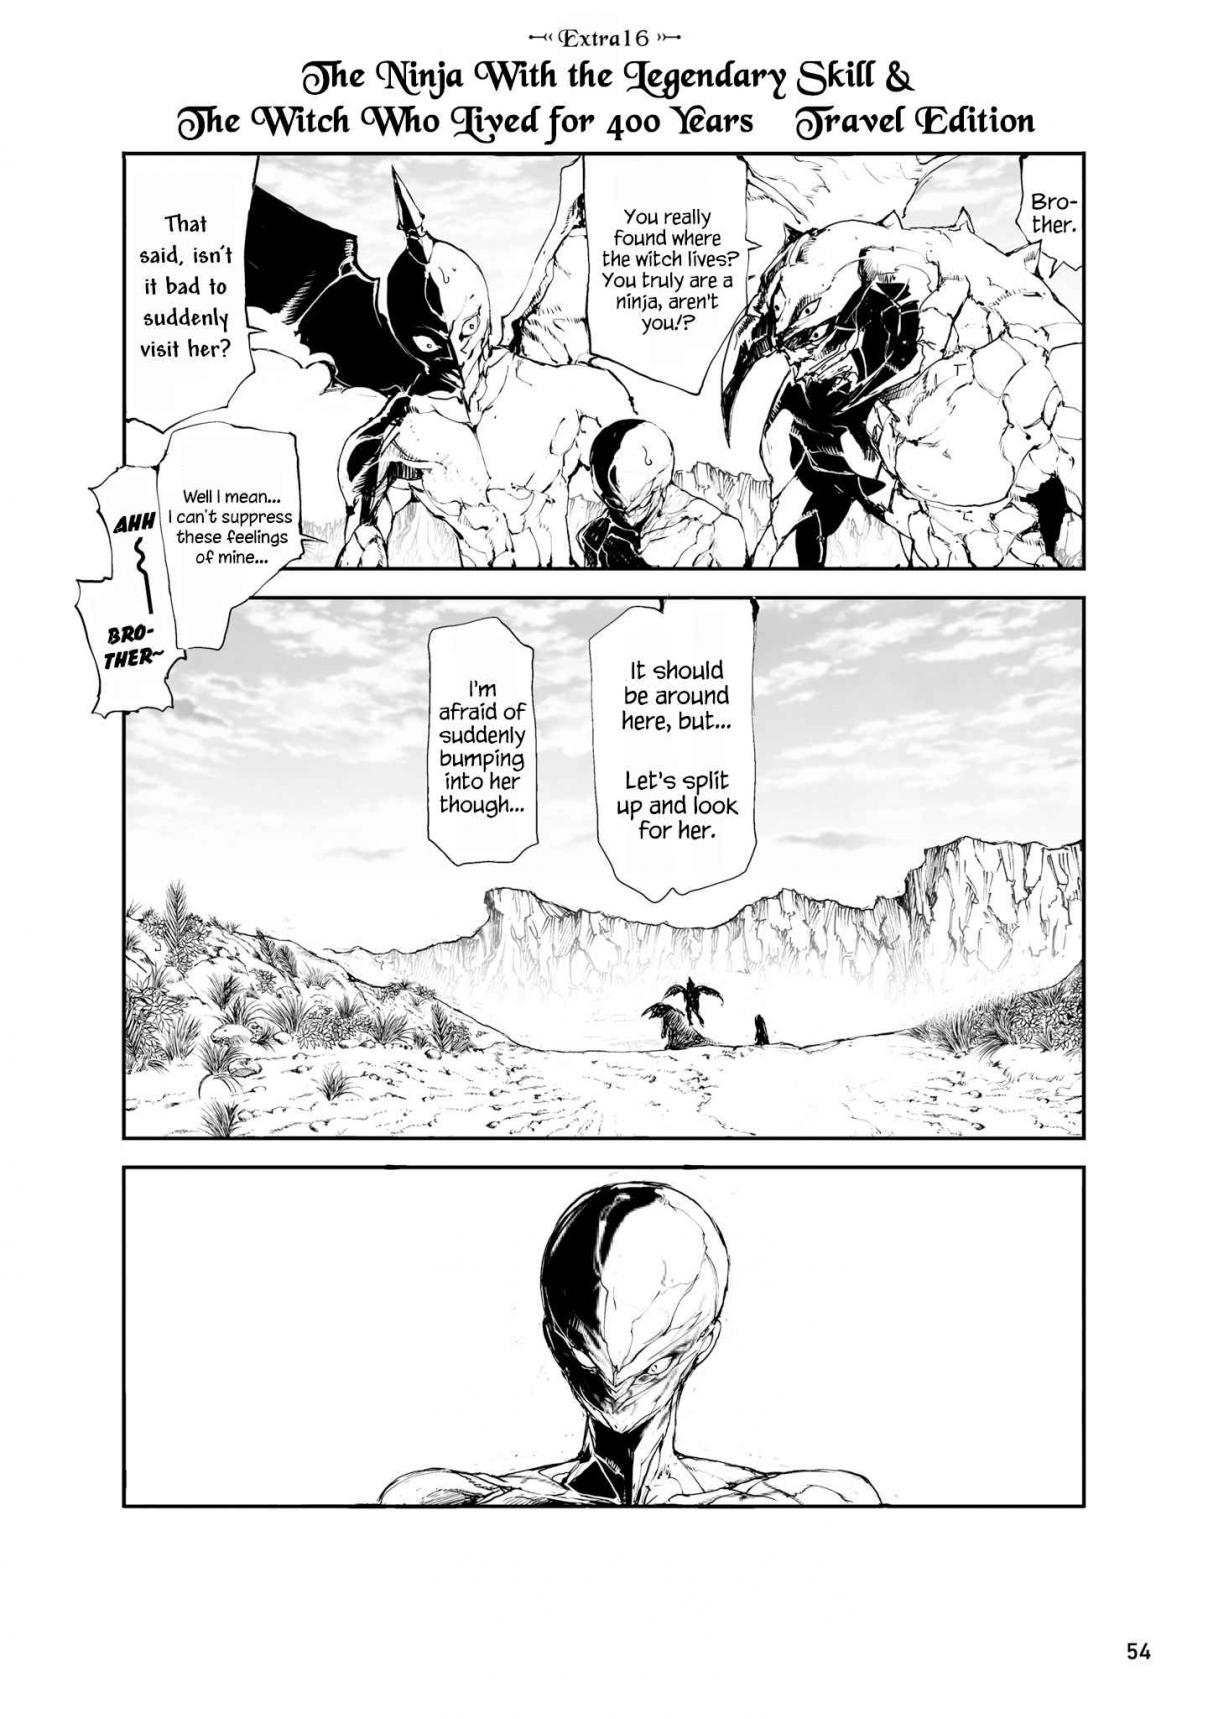 Handyman Saitou in Another World Ch. 33.5 The Ninja With the Legendary Skill & The Witch Who Lived for 400 Years Travel Edition